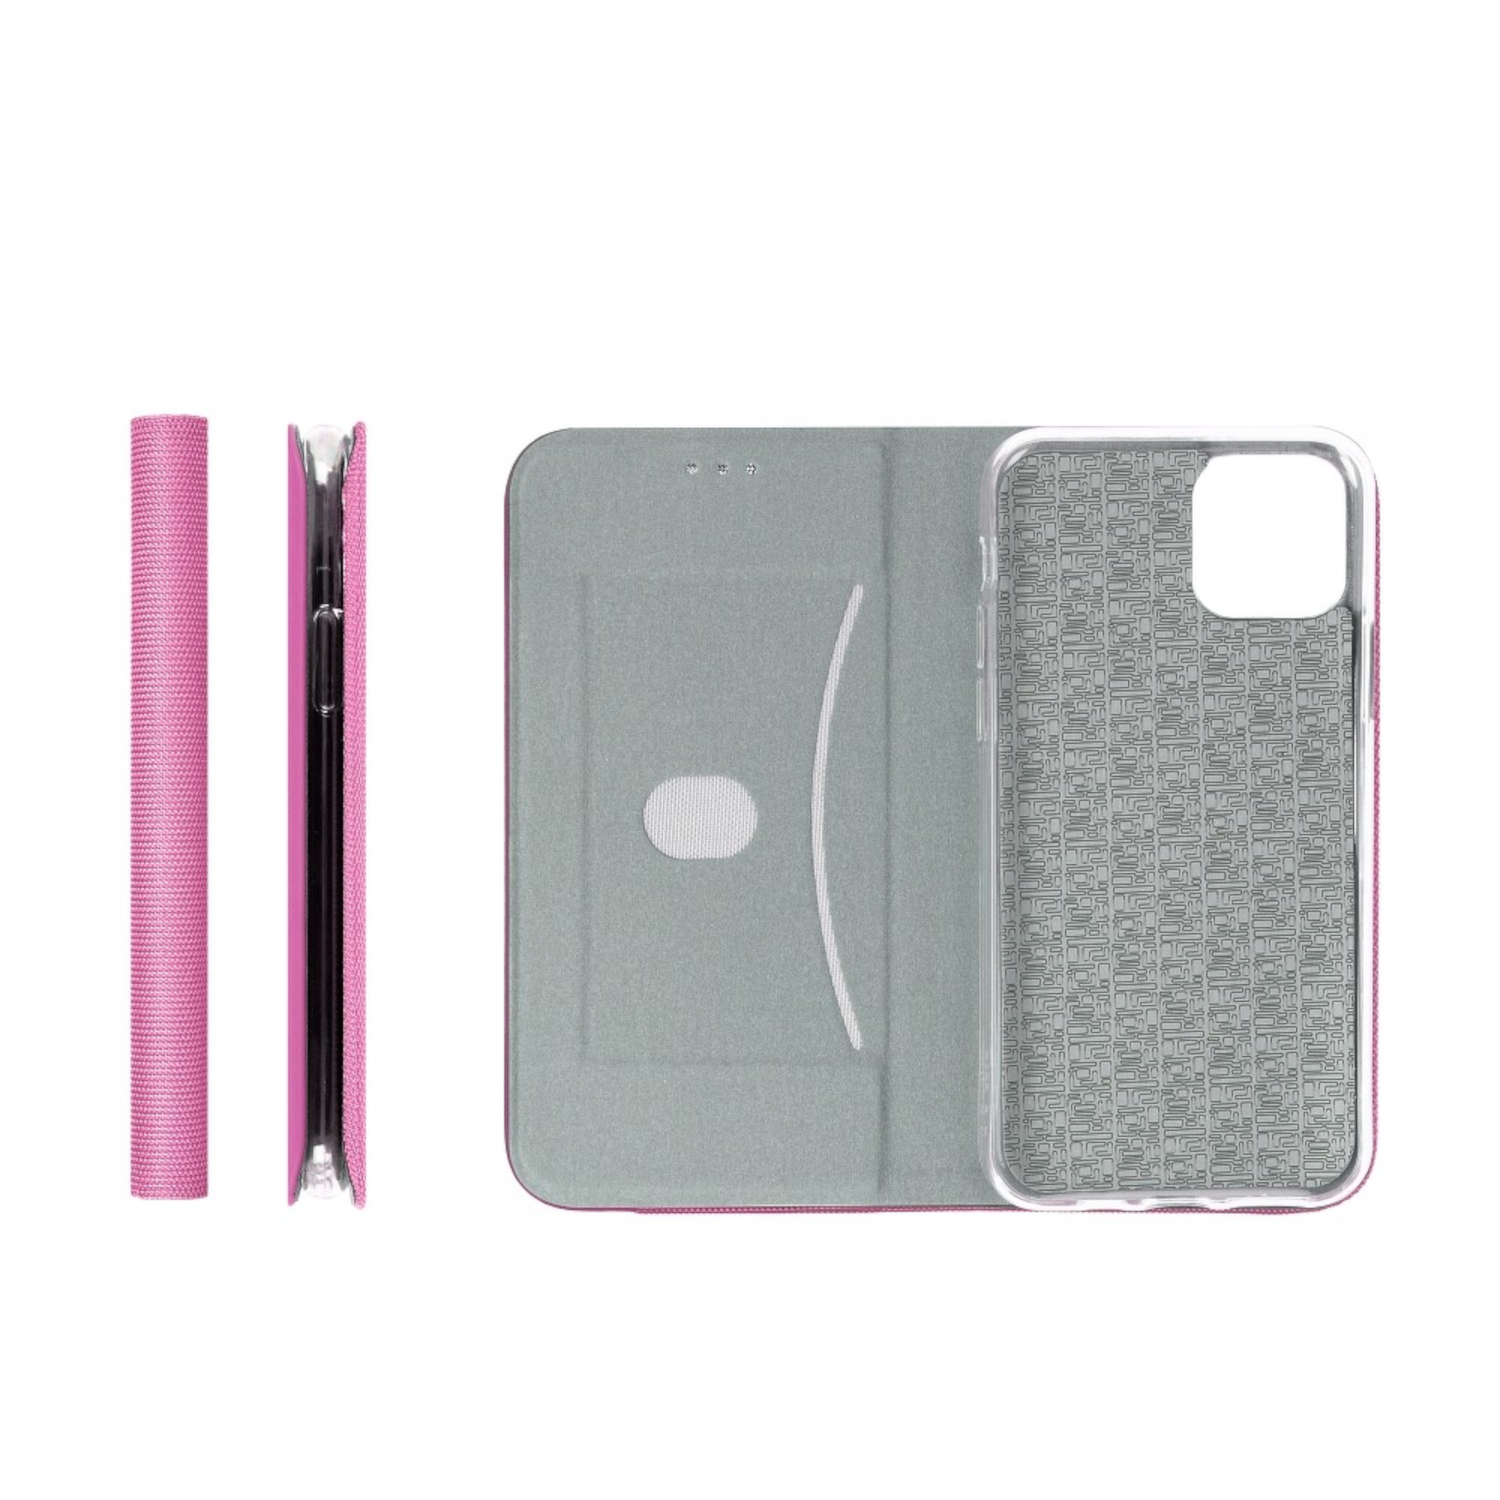 iPhone JAMCOVER Bookcase Apple, Rosa Bookcover, Pro 12 Mix, Max,